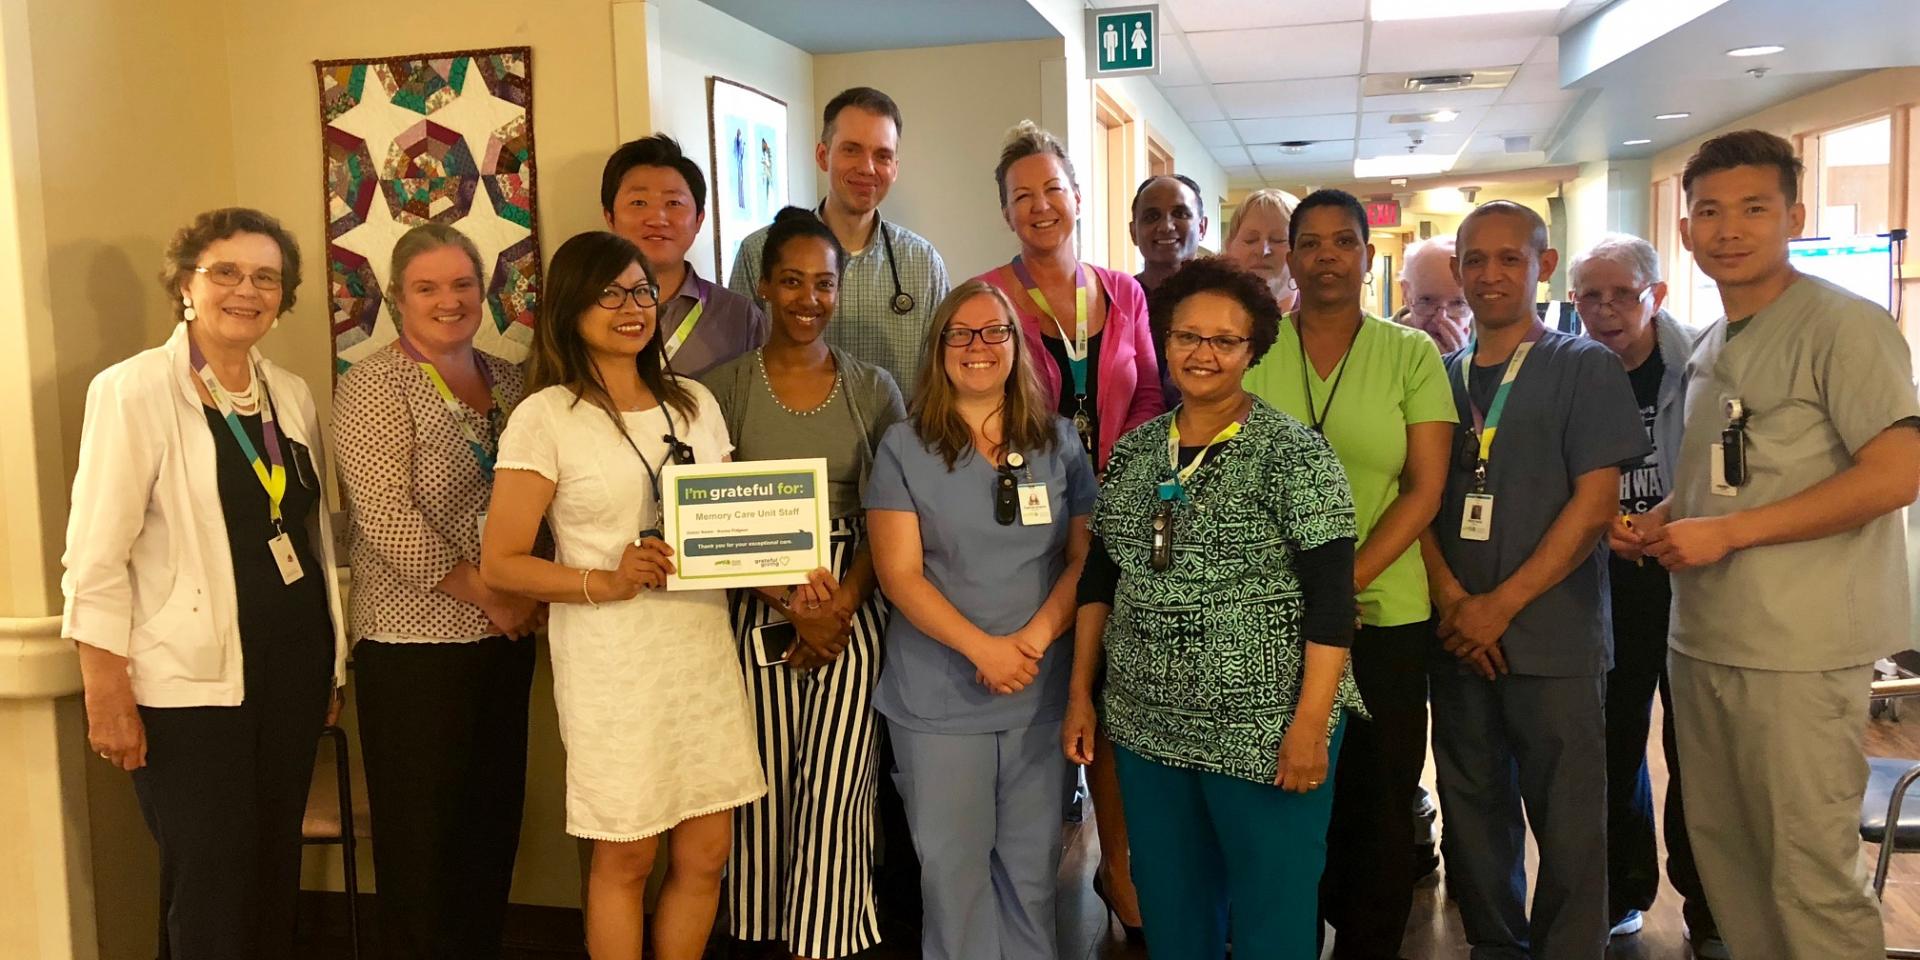 The Memory Care Unit team at Michael Garron Hospital accepting their Grateful Giving recognition